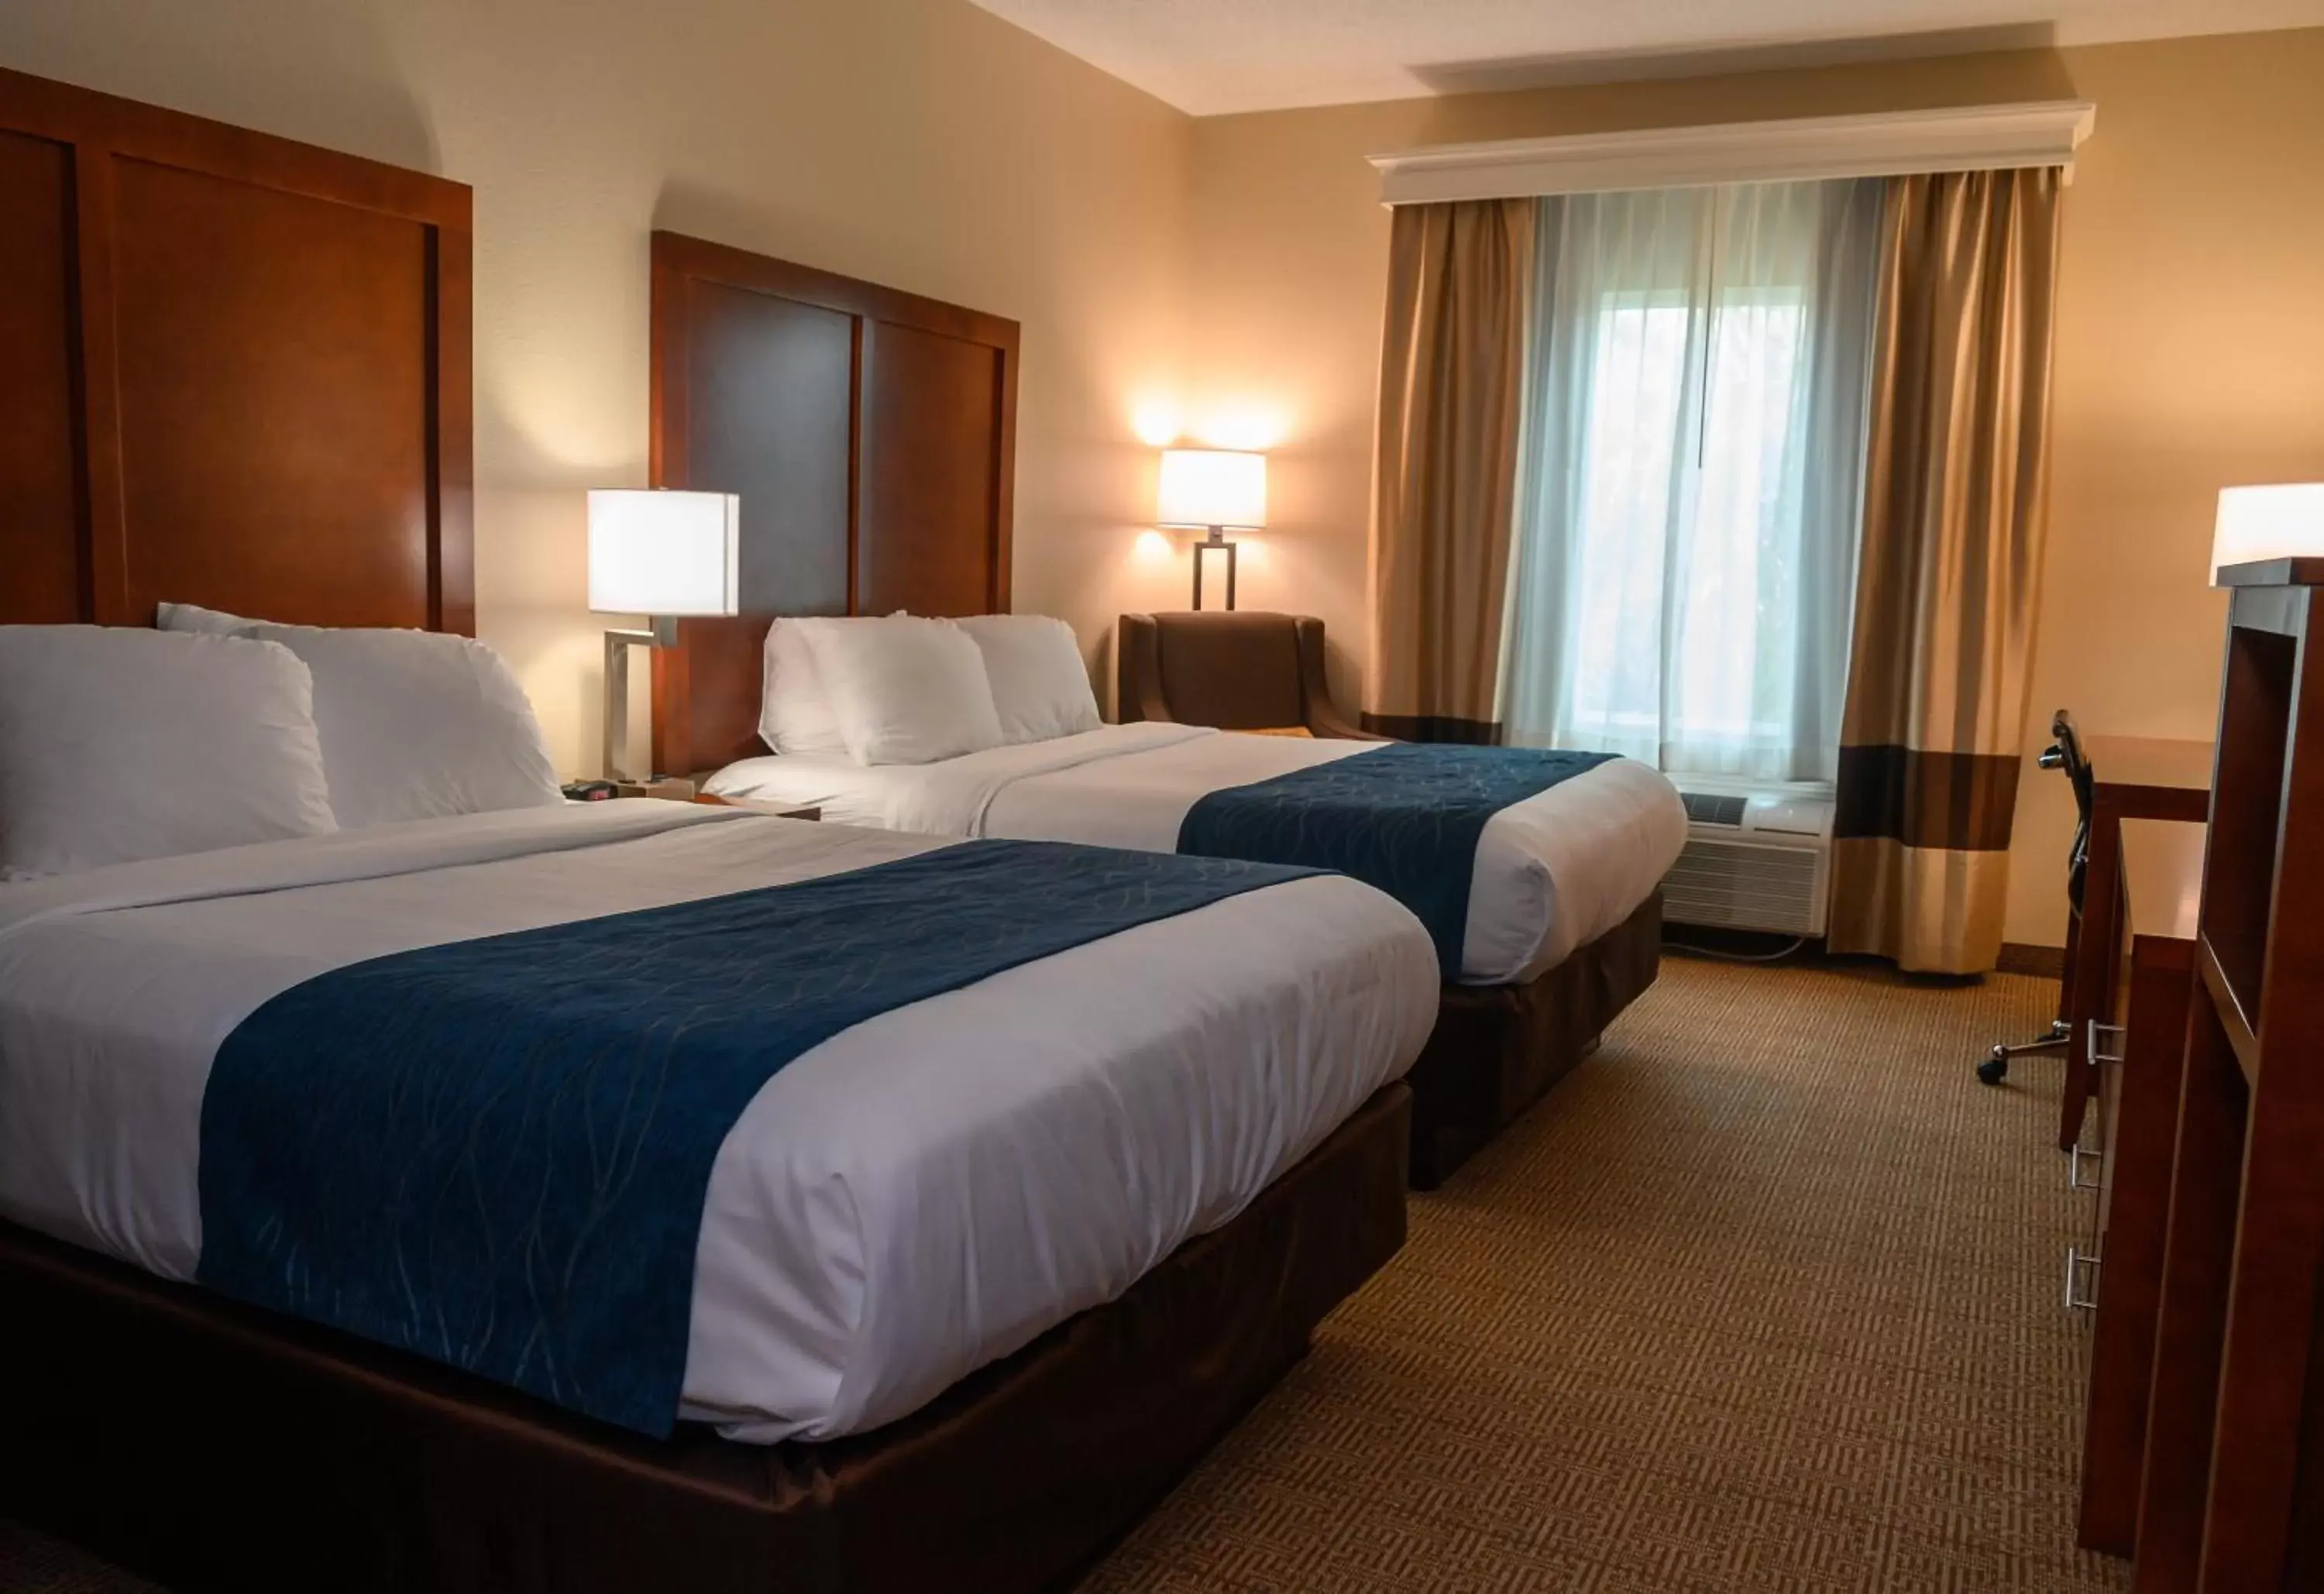 Superior Queen Room with Two Queen Beds and Tub - Non-Smoking in Comfort Inn & Suites Patriots Point